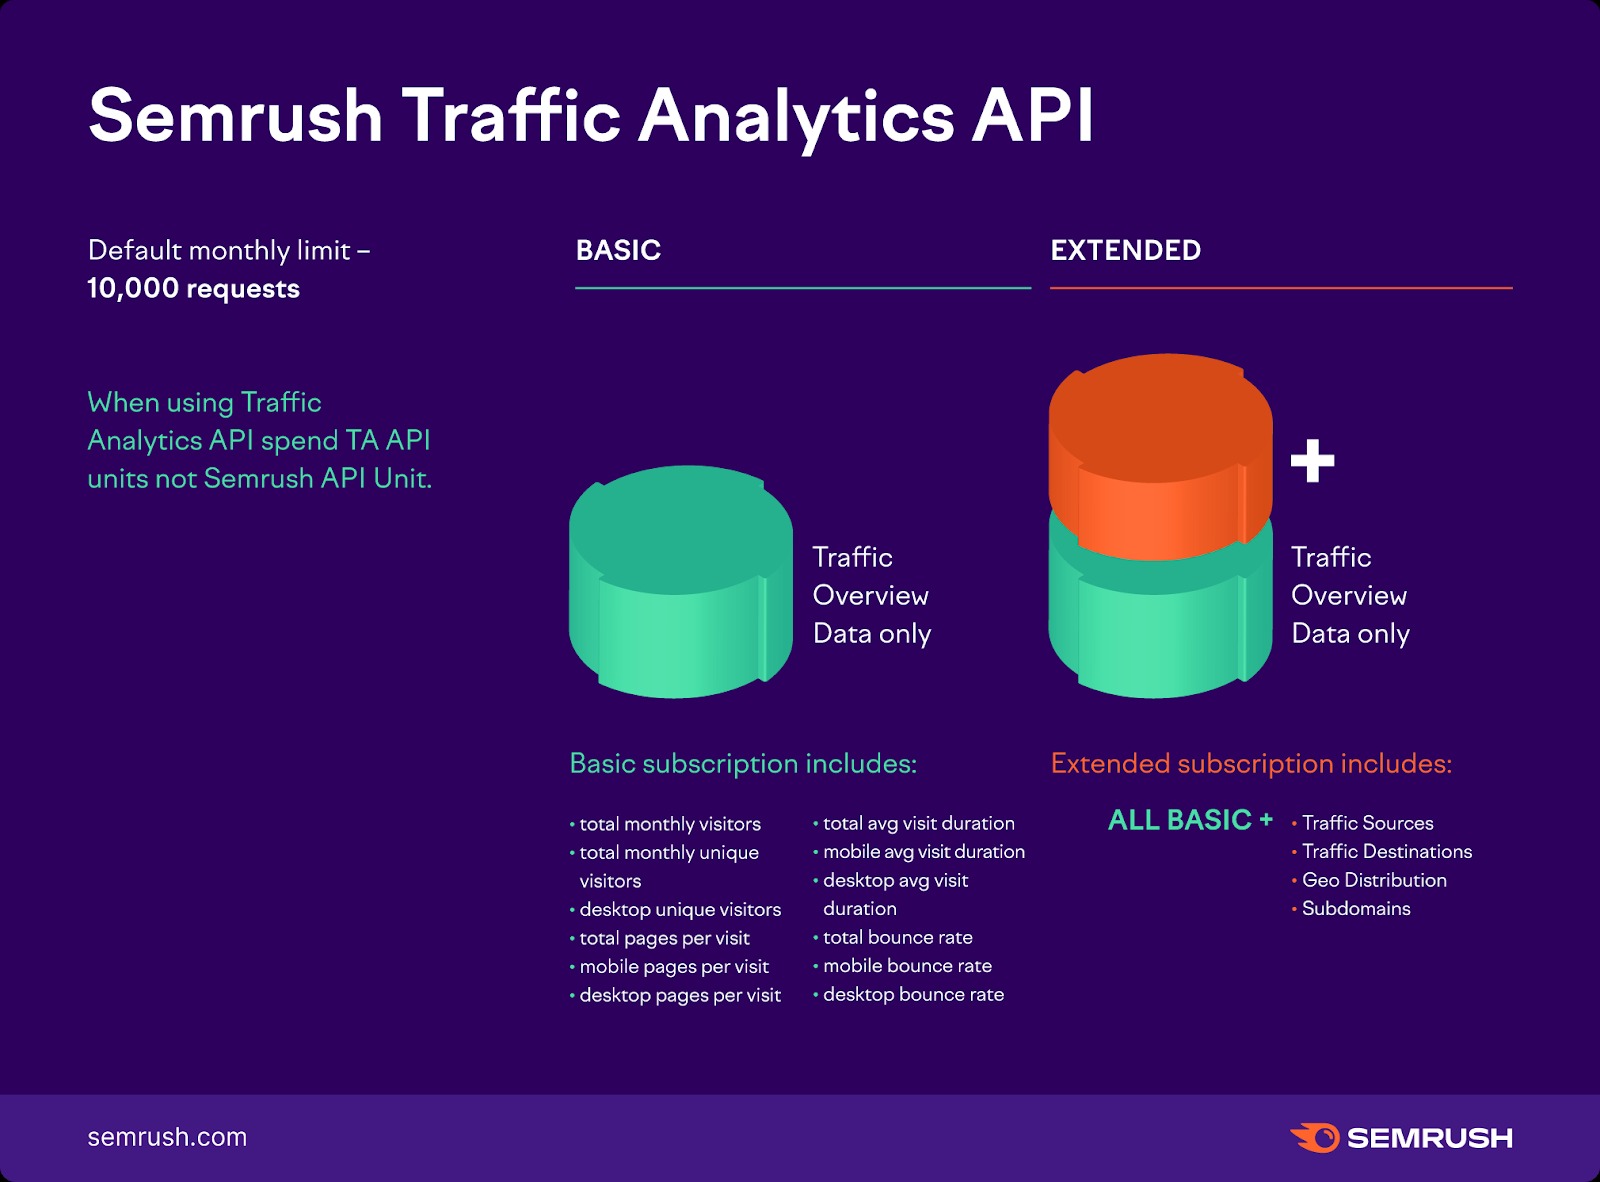 A list of Semrush Traffic Analytics API limits, provided for Basic and Extended subscription plans. 